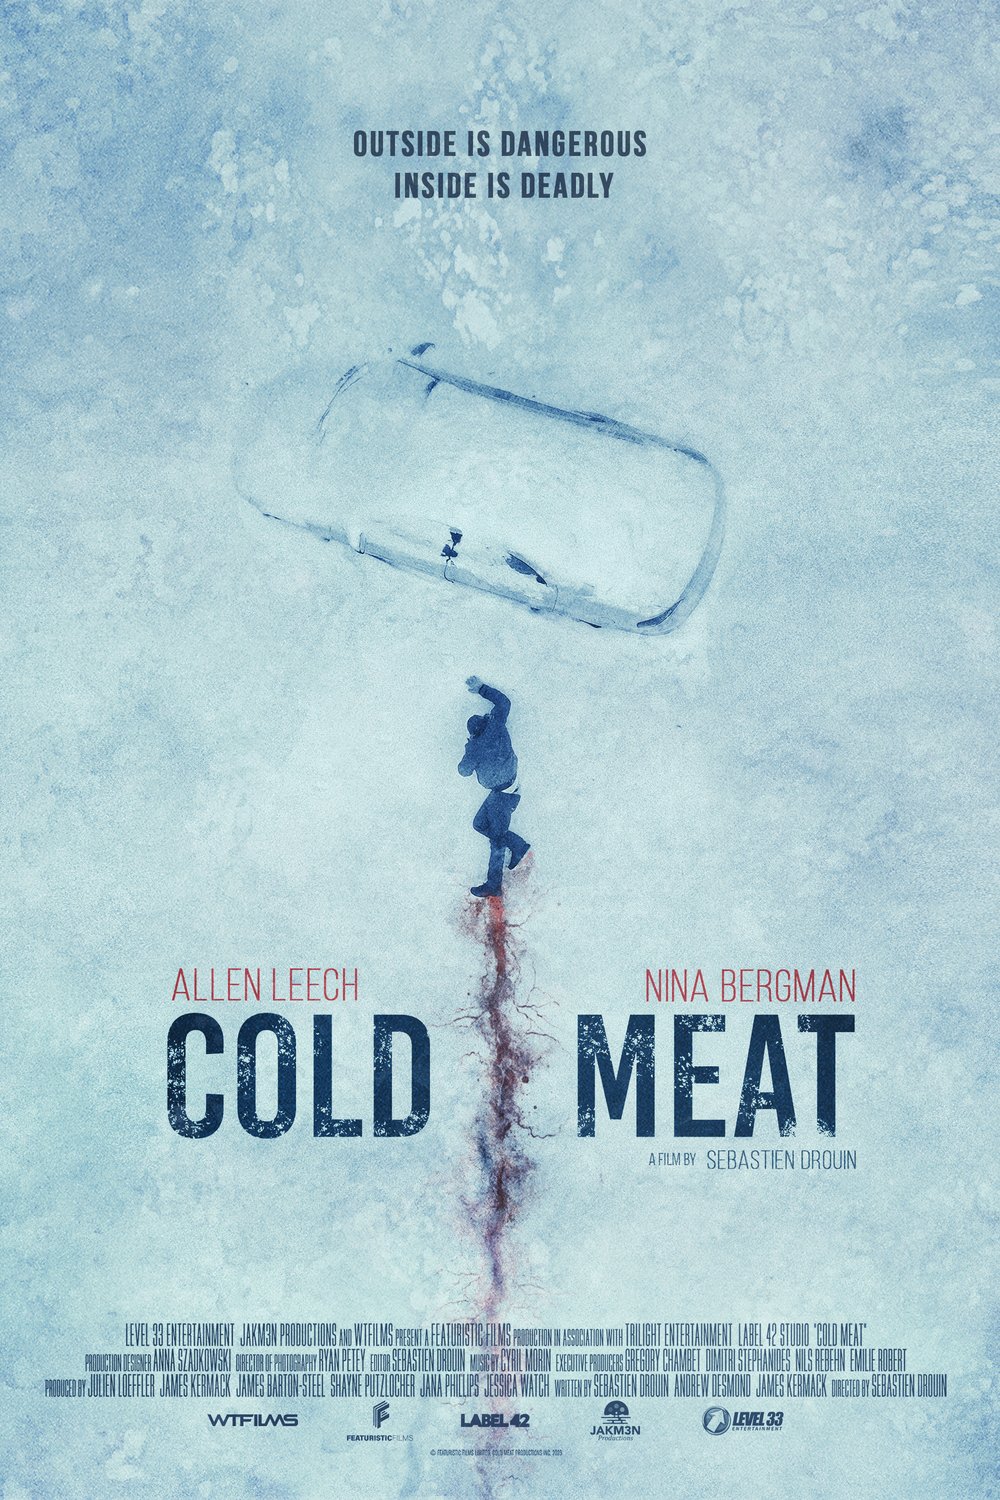 Poster of the movie Cold Meat